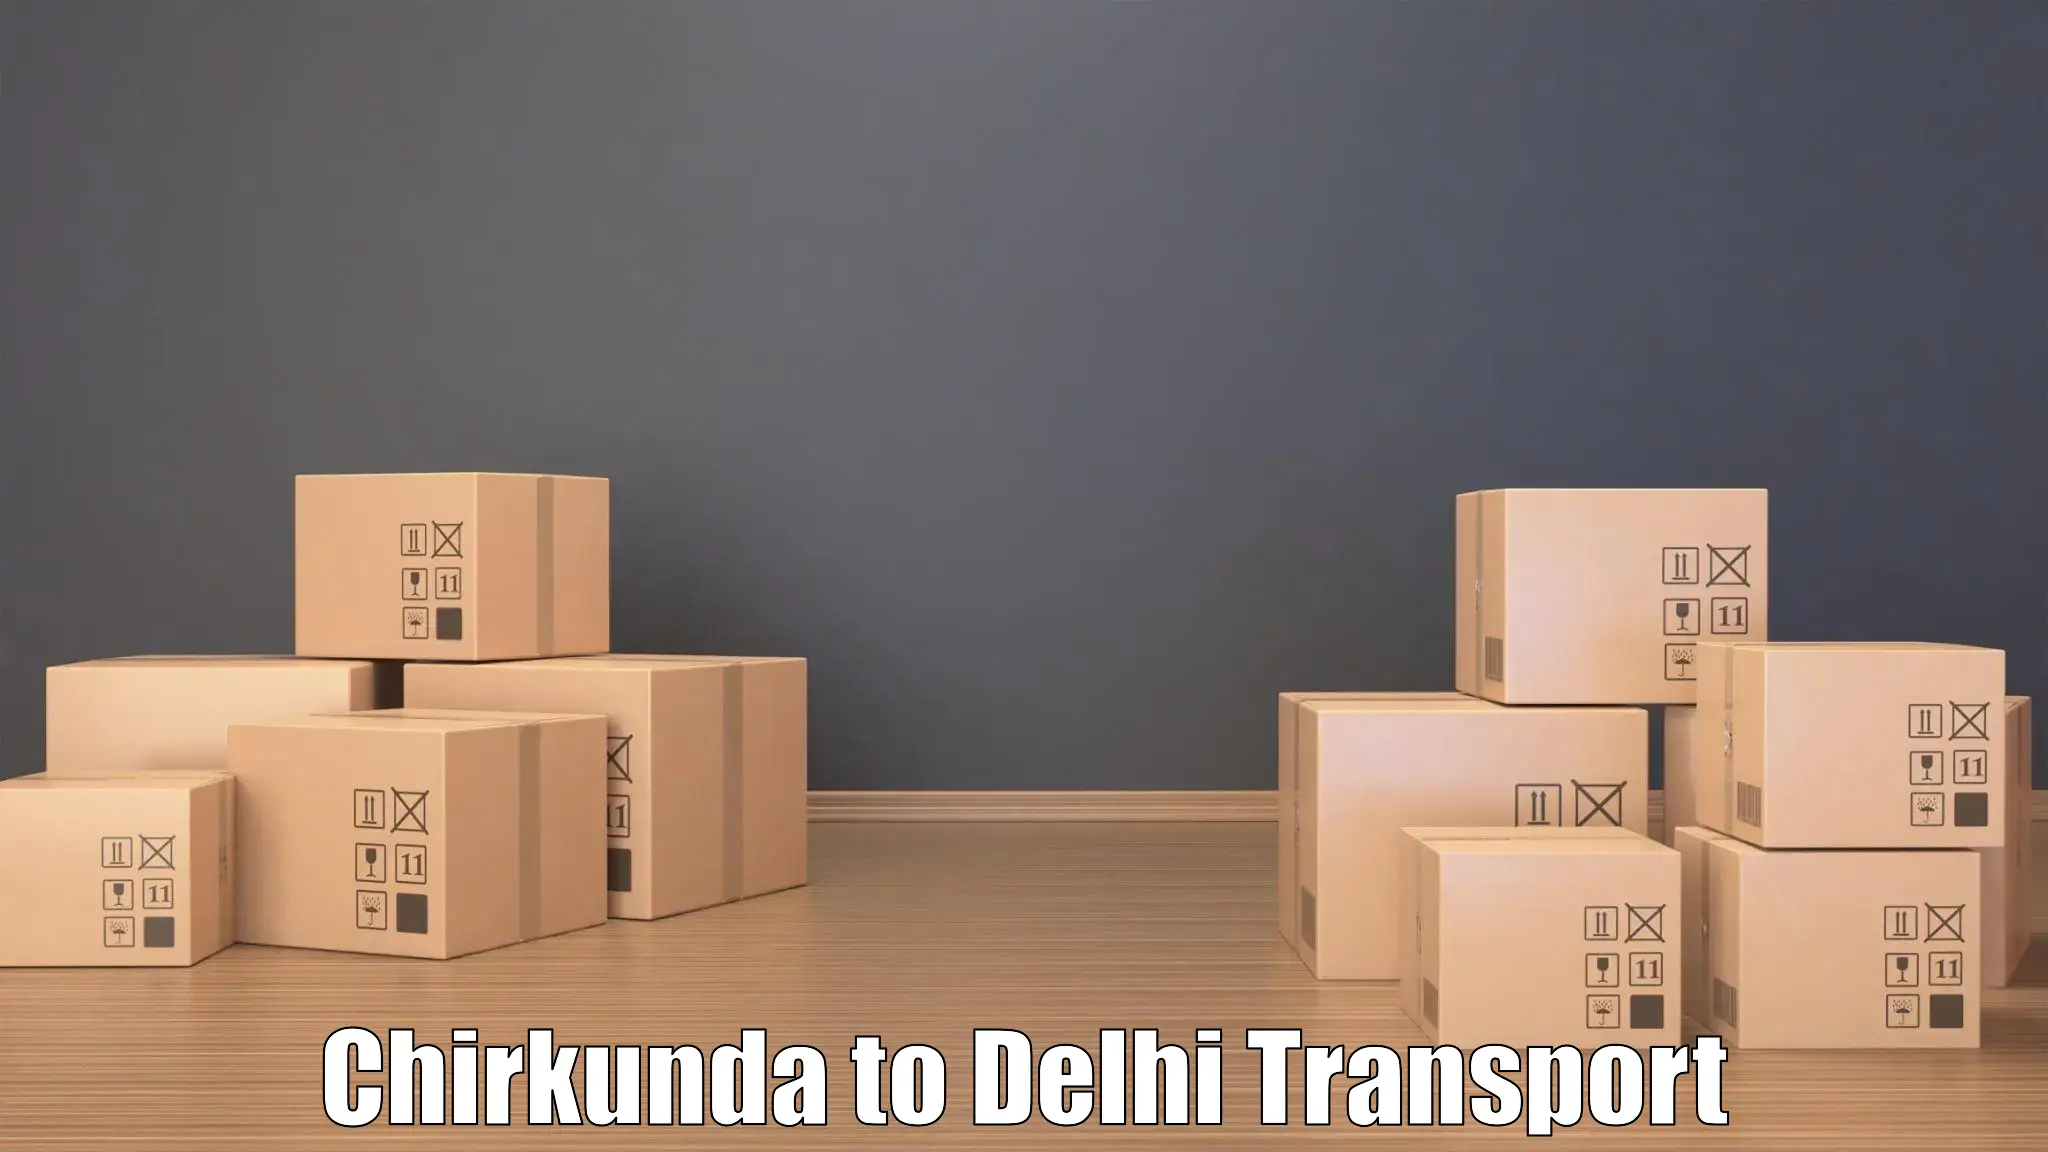 Transport bike from one state to another Chirkunda to East Delhi